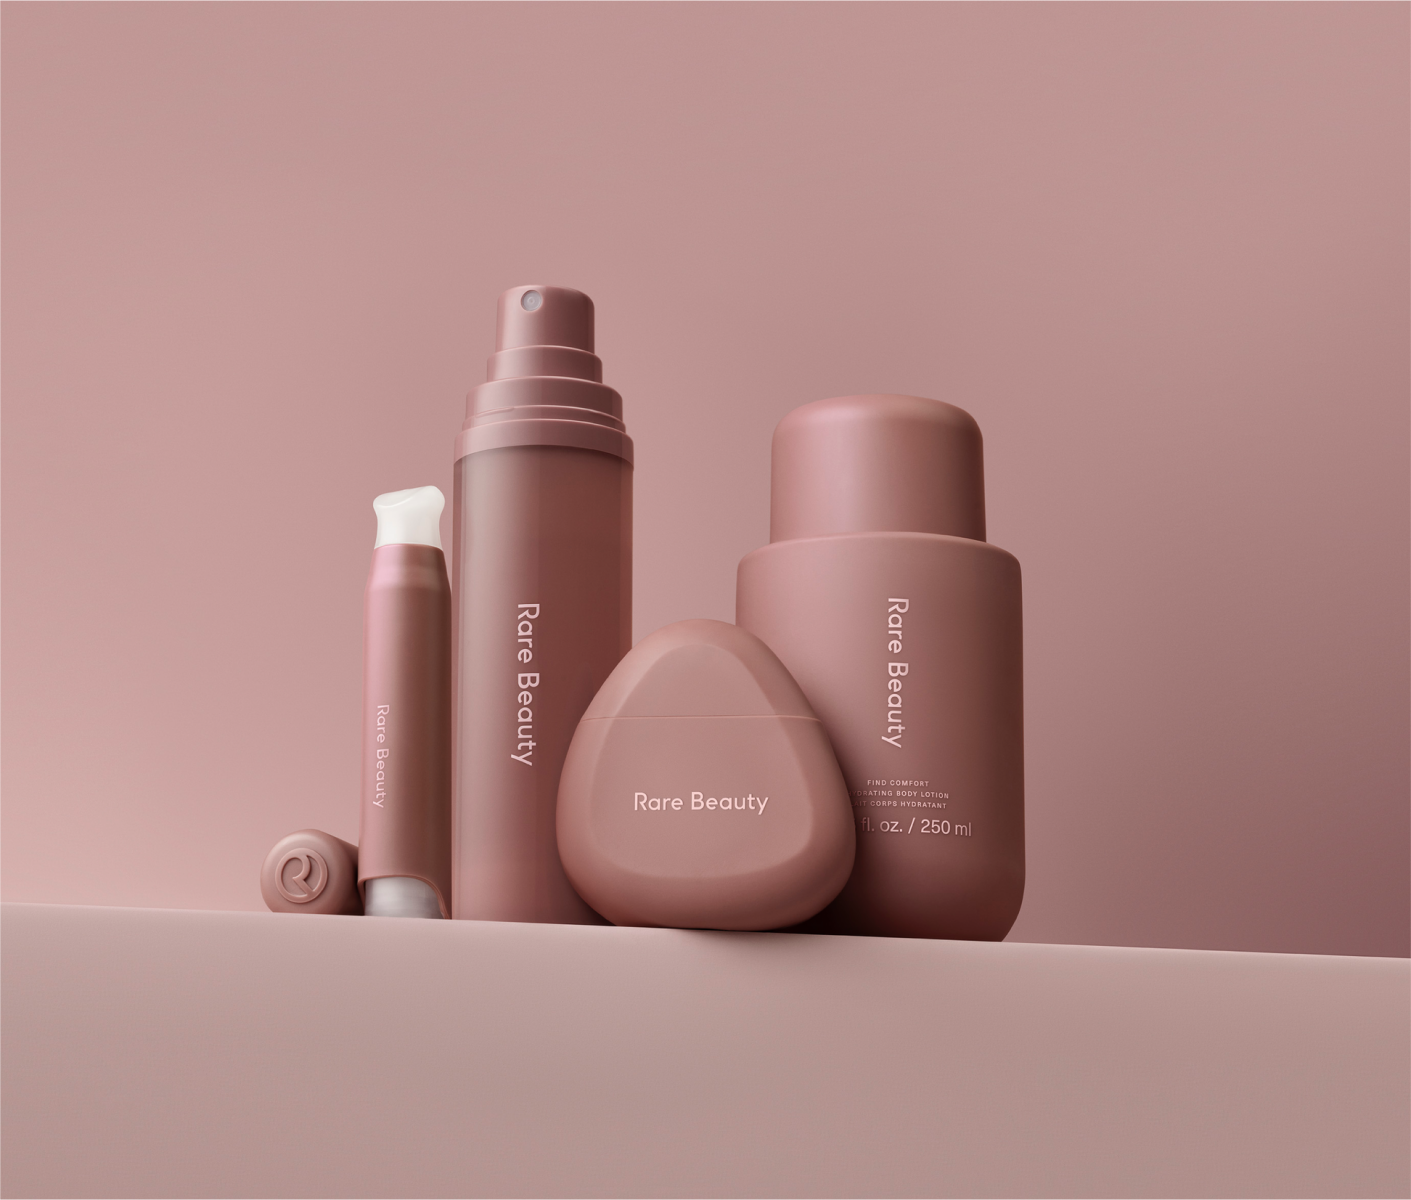 Rare Beauty Find Comfort New Body Care Line